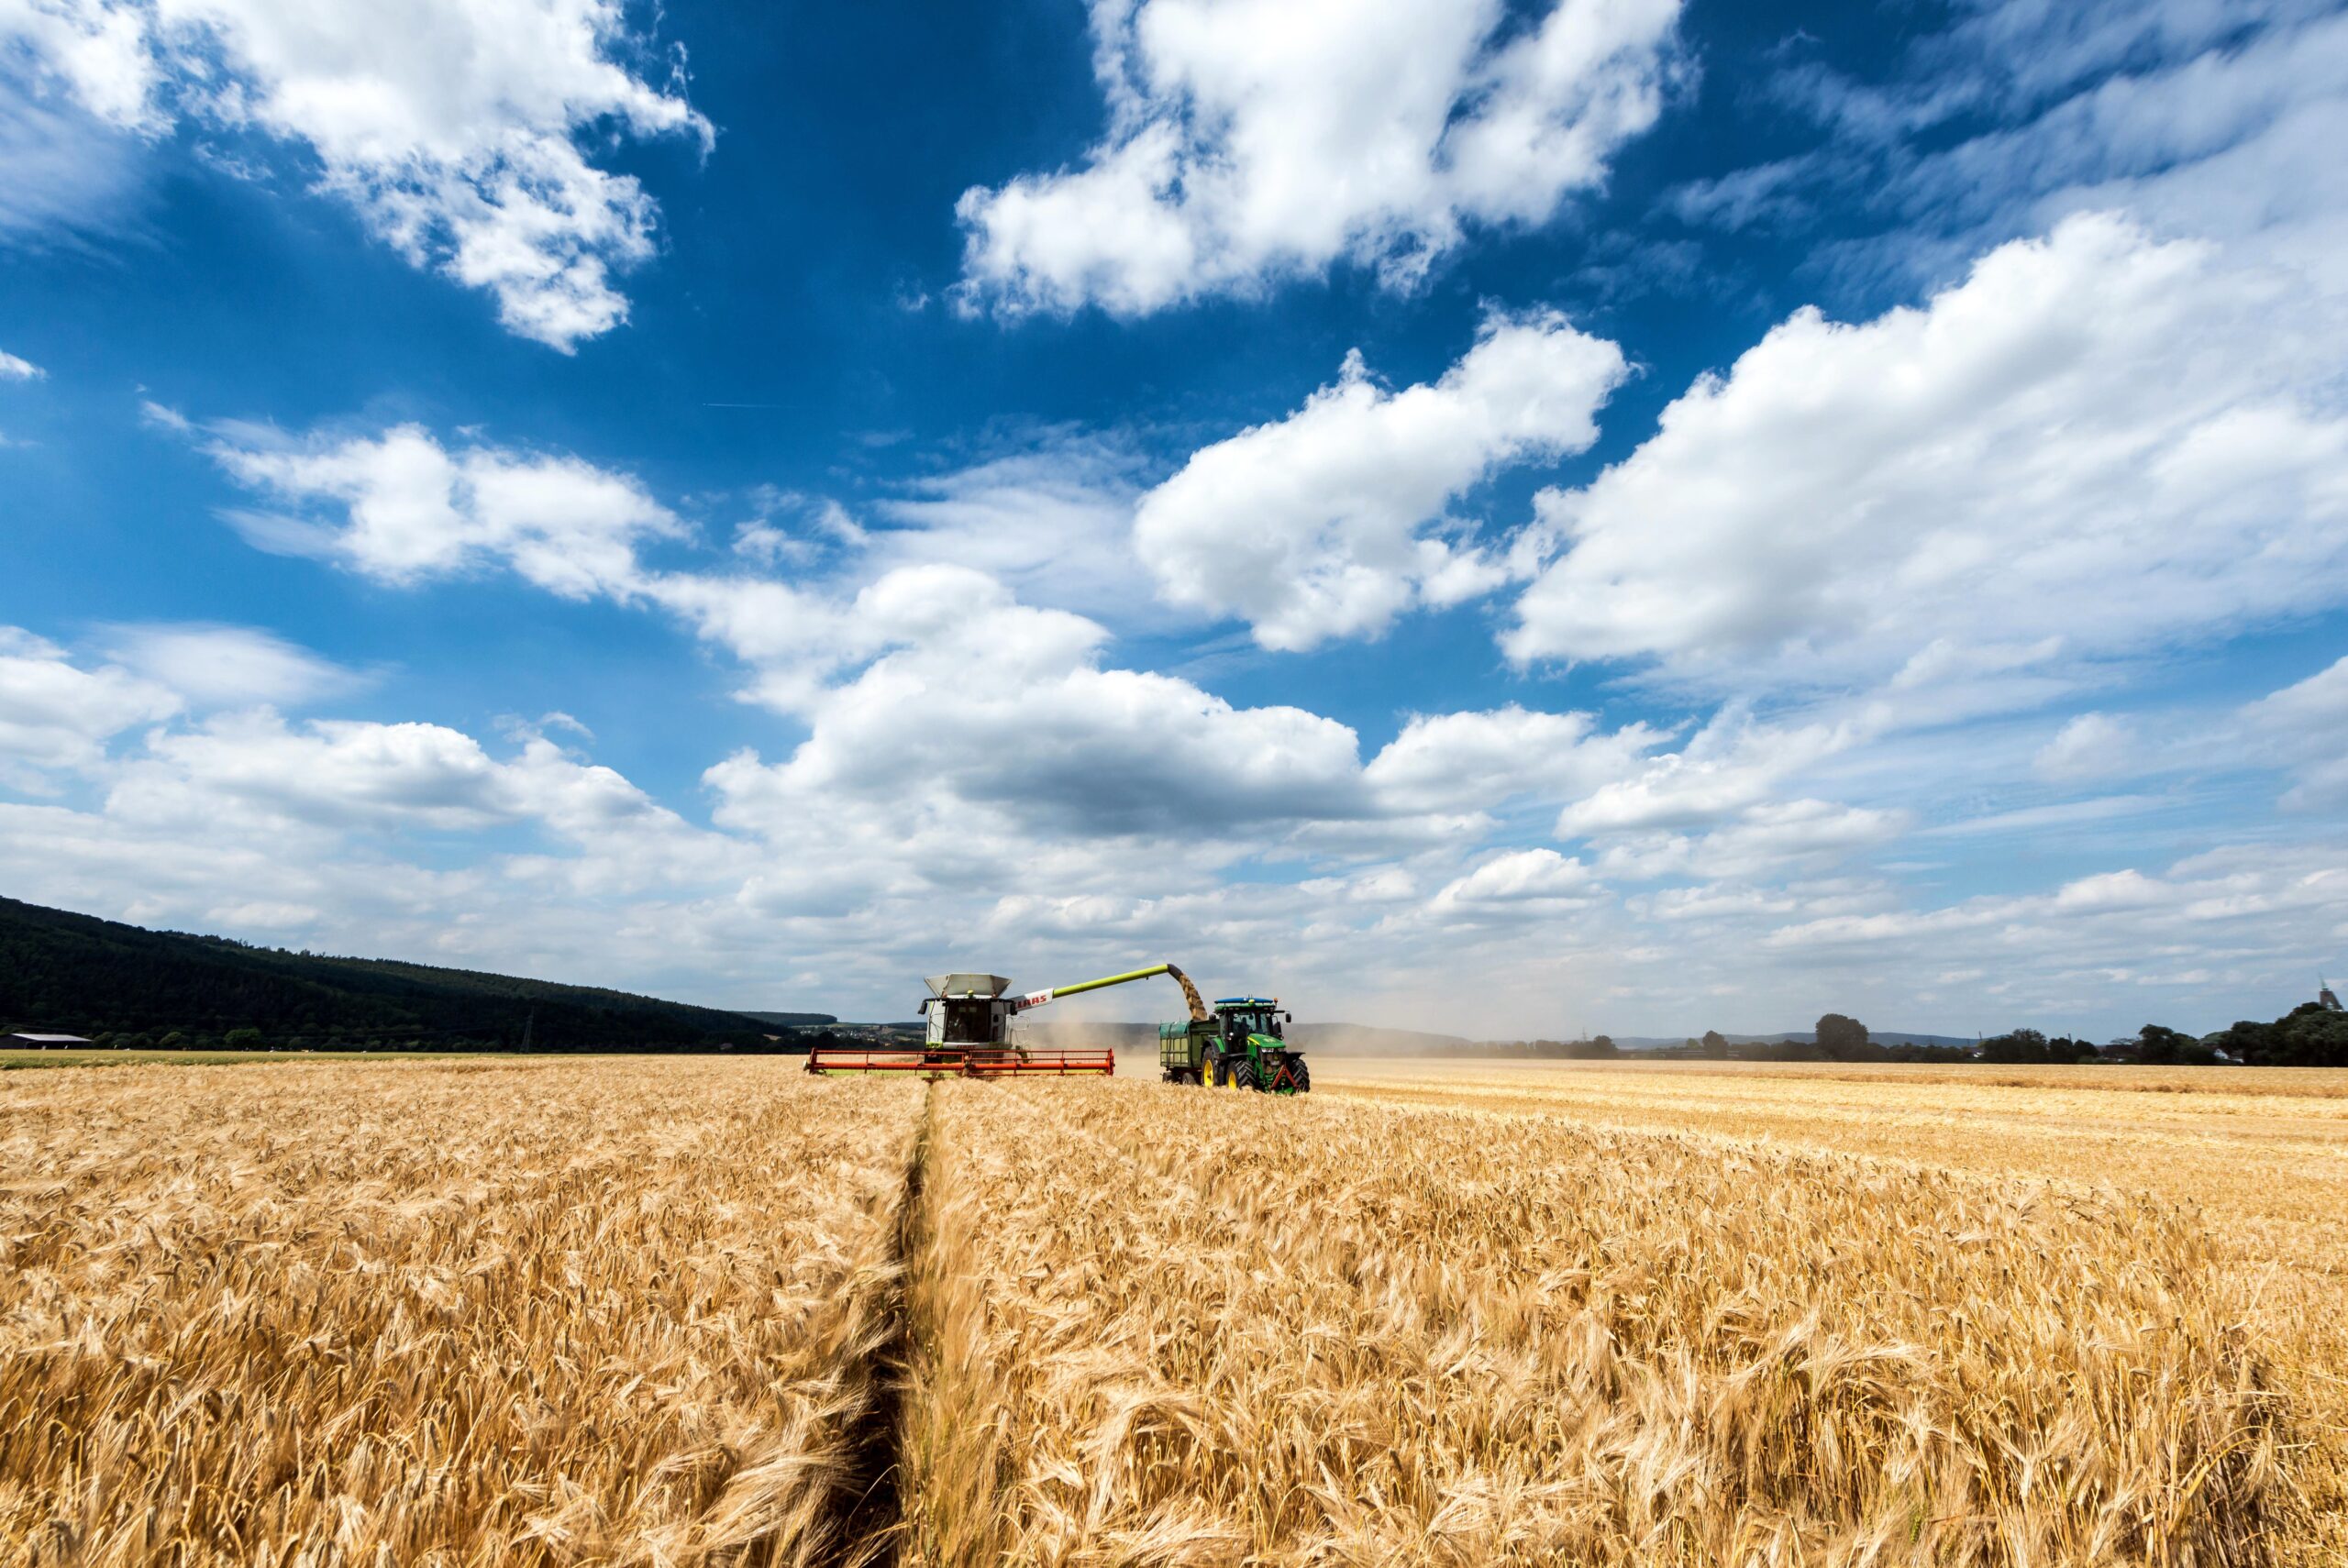 Technologies Supporting Sustainable Grain Production: The Future of Agriculture